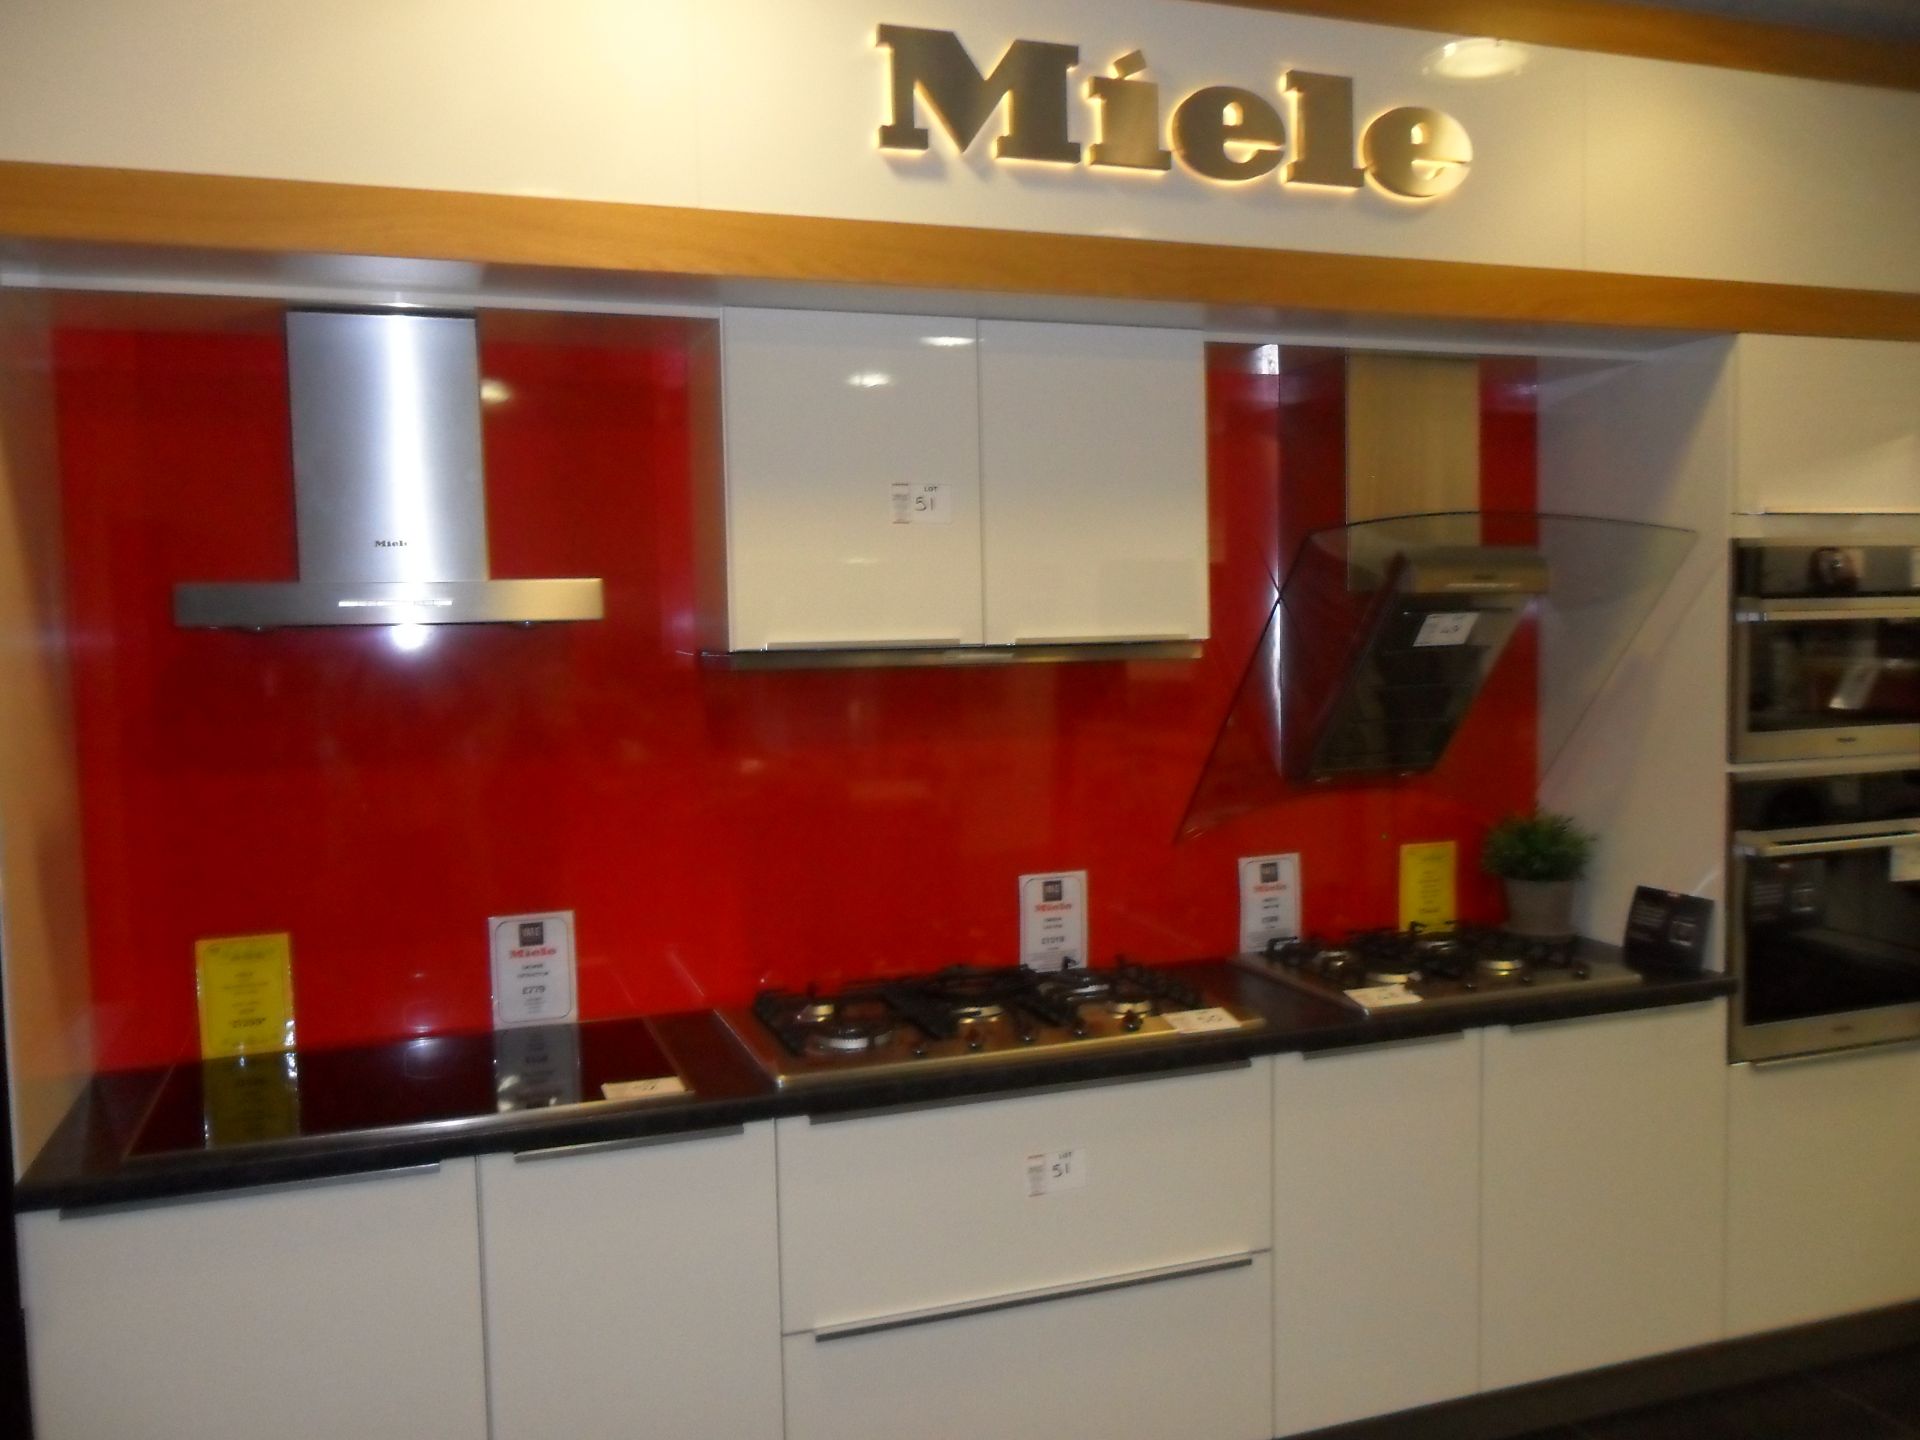 Miele cream FITTED KITCHEN with deep red splash back feature wall - Image 2 of 3